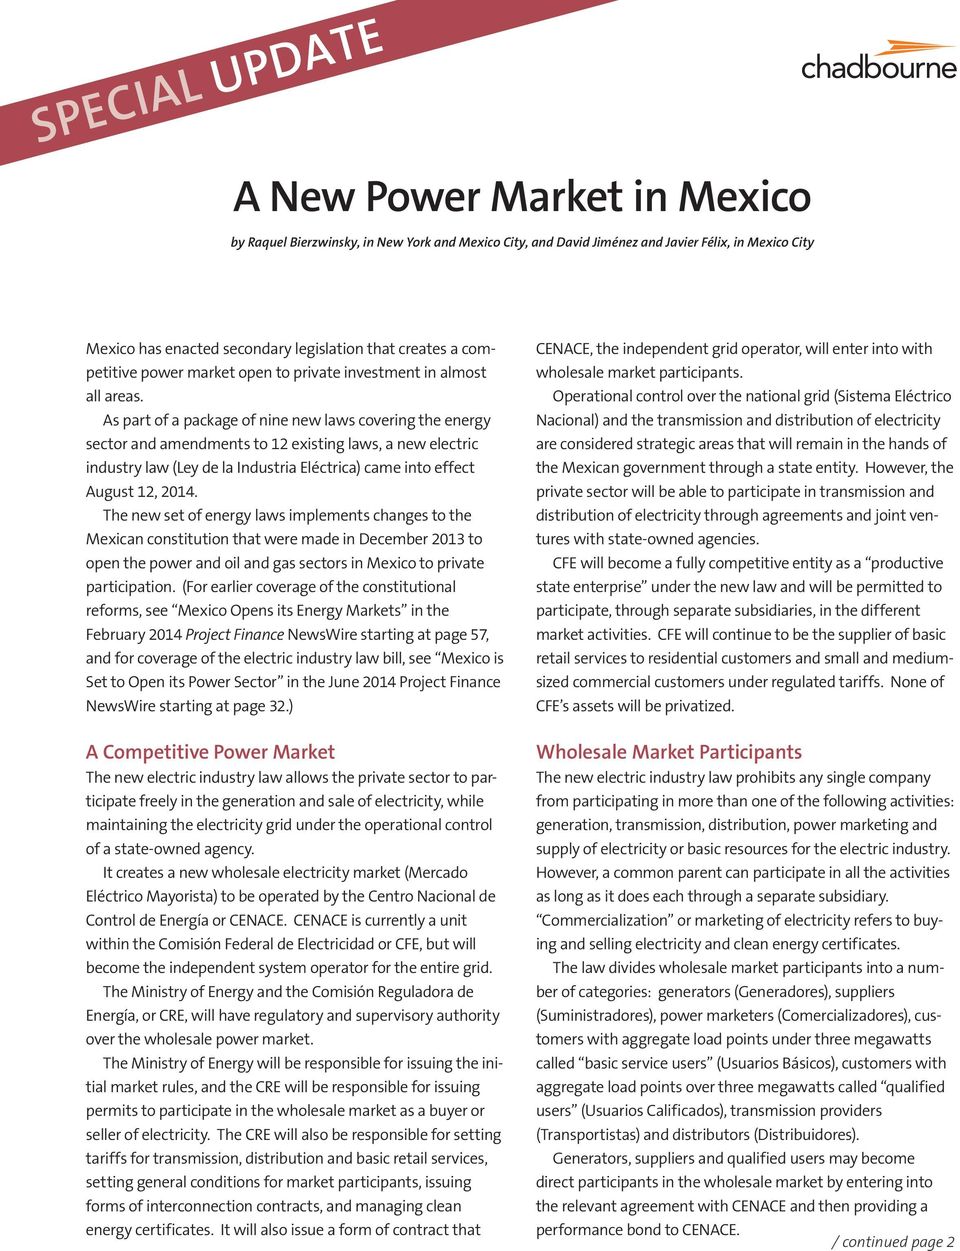 As part of a package of nine new laws covering the energy sector and amendments to 12 existing laws, a new electric industry law (Ley de la Industria Eléctrica) came into effect August 12, 2014.